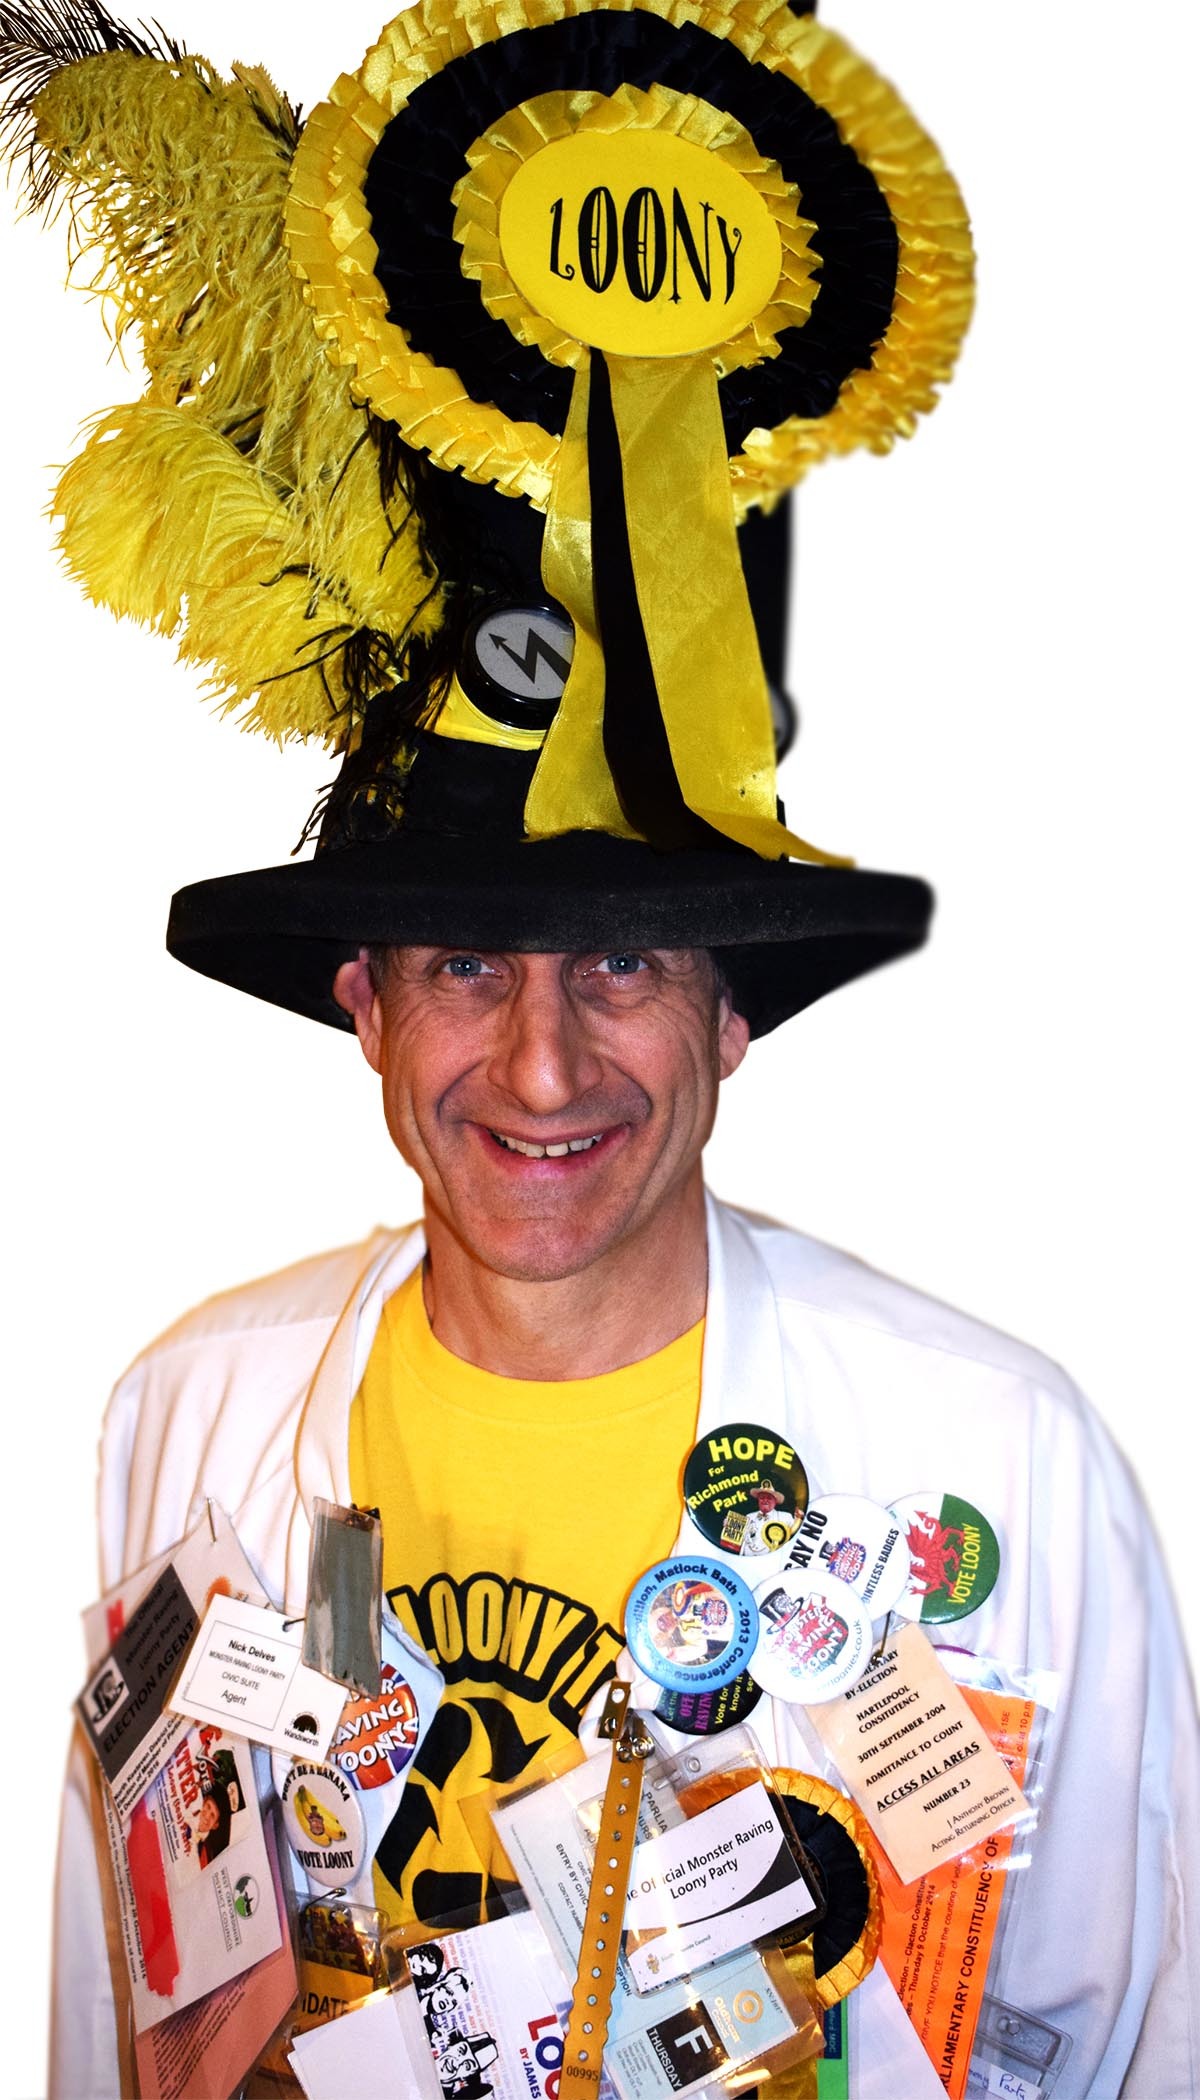 The Incredible Flying Brick, The Monster Raving Loony Party